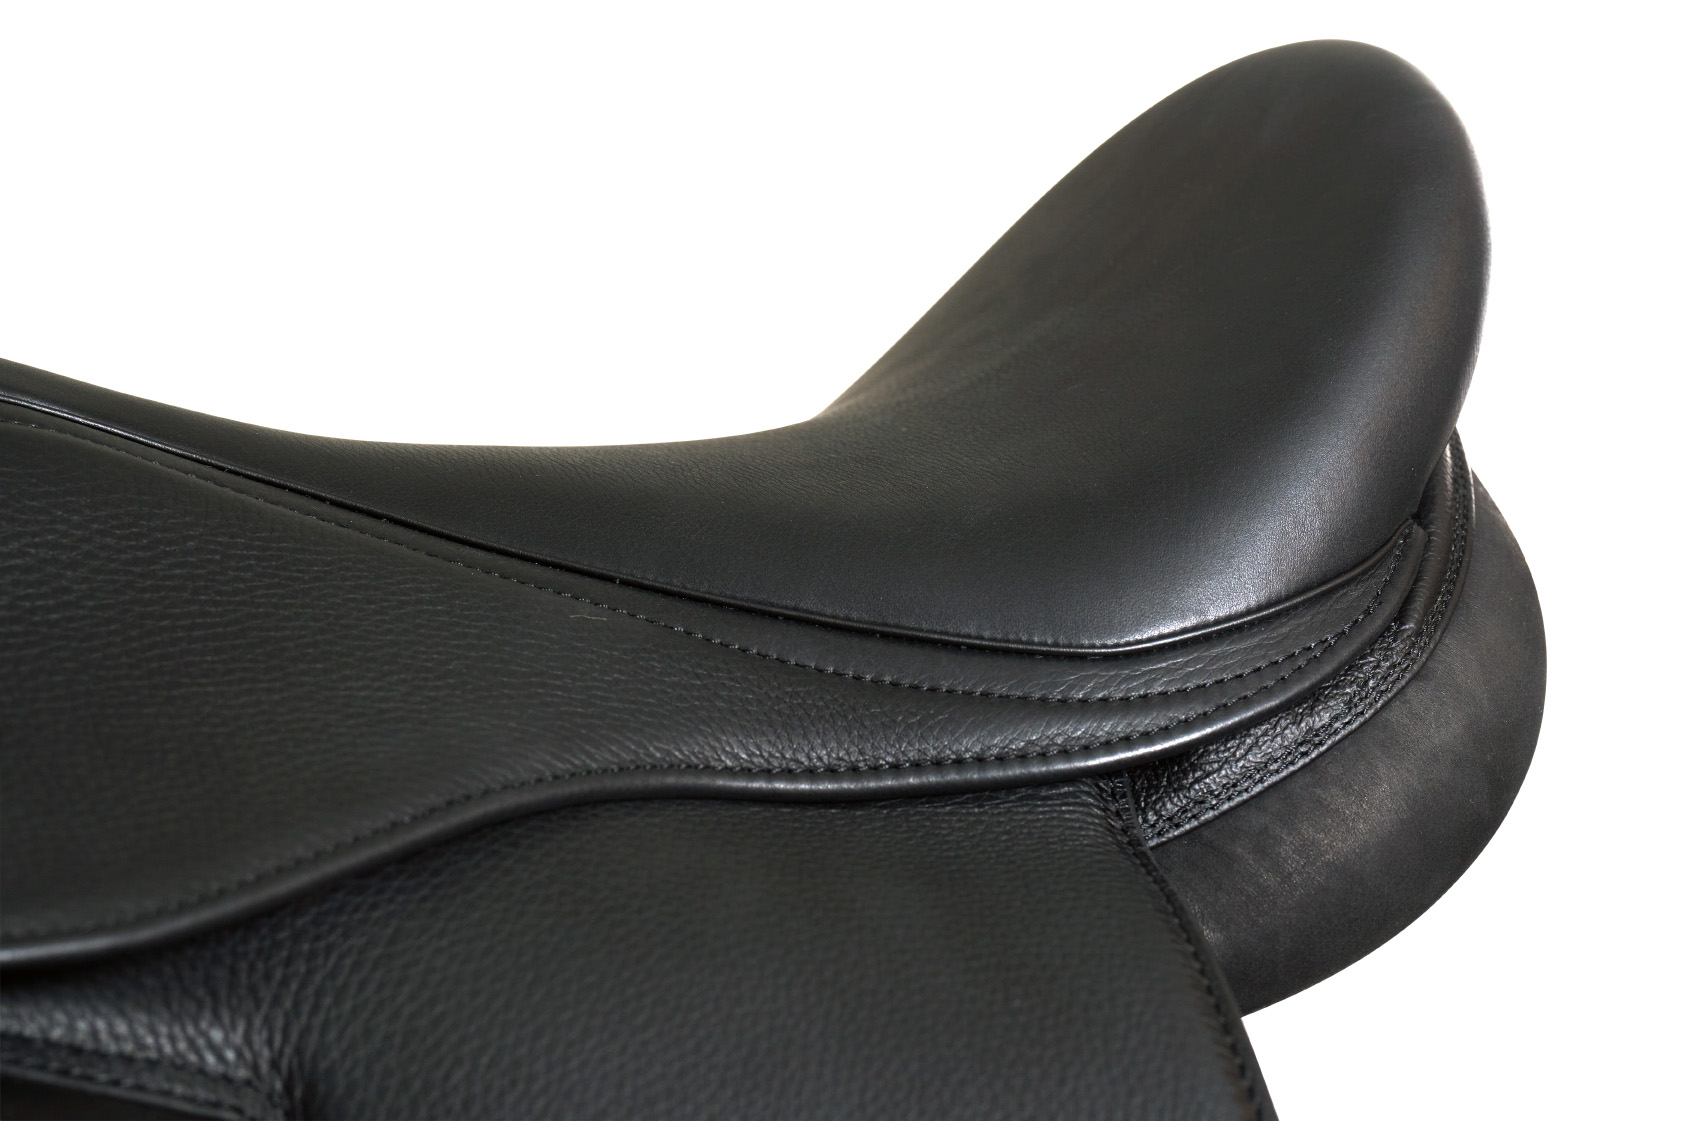 boom brand on Tølthester from Blesi, L new saddle an